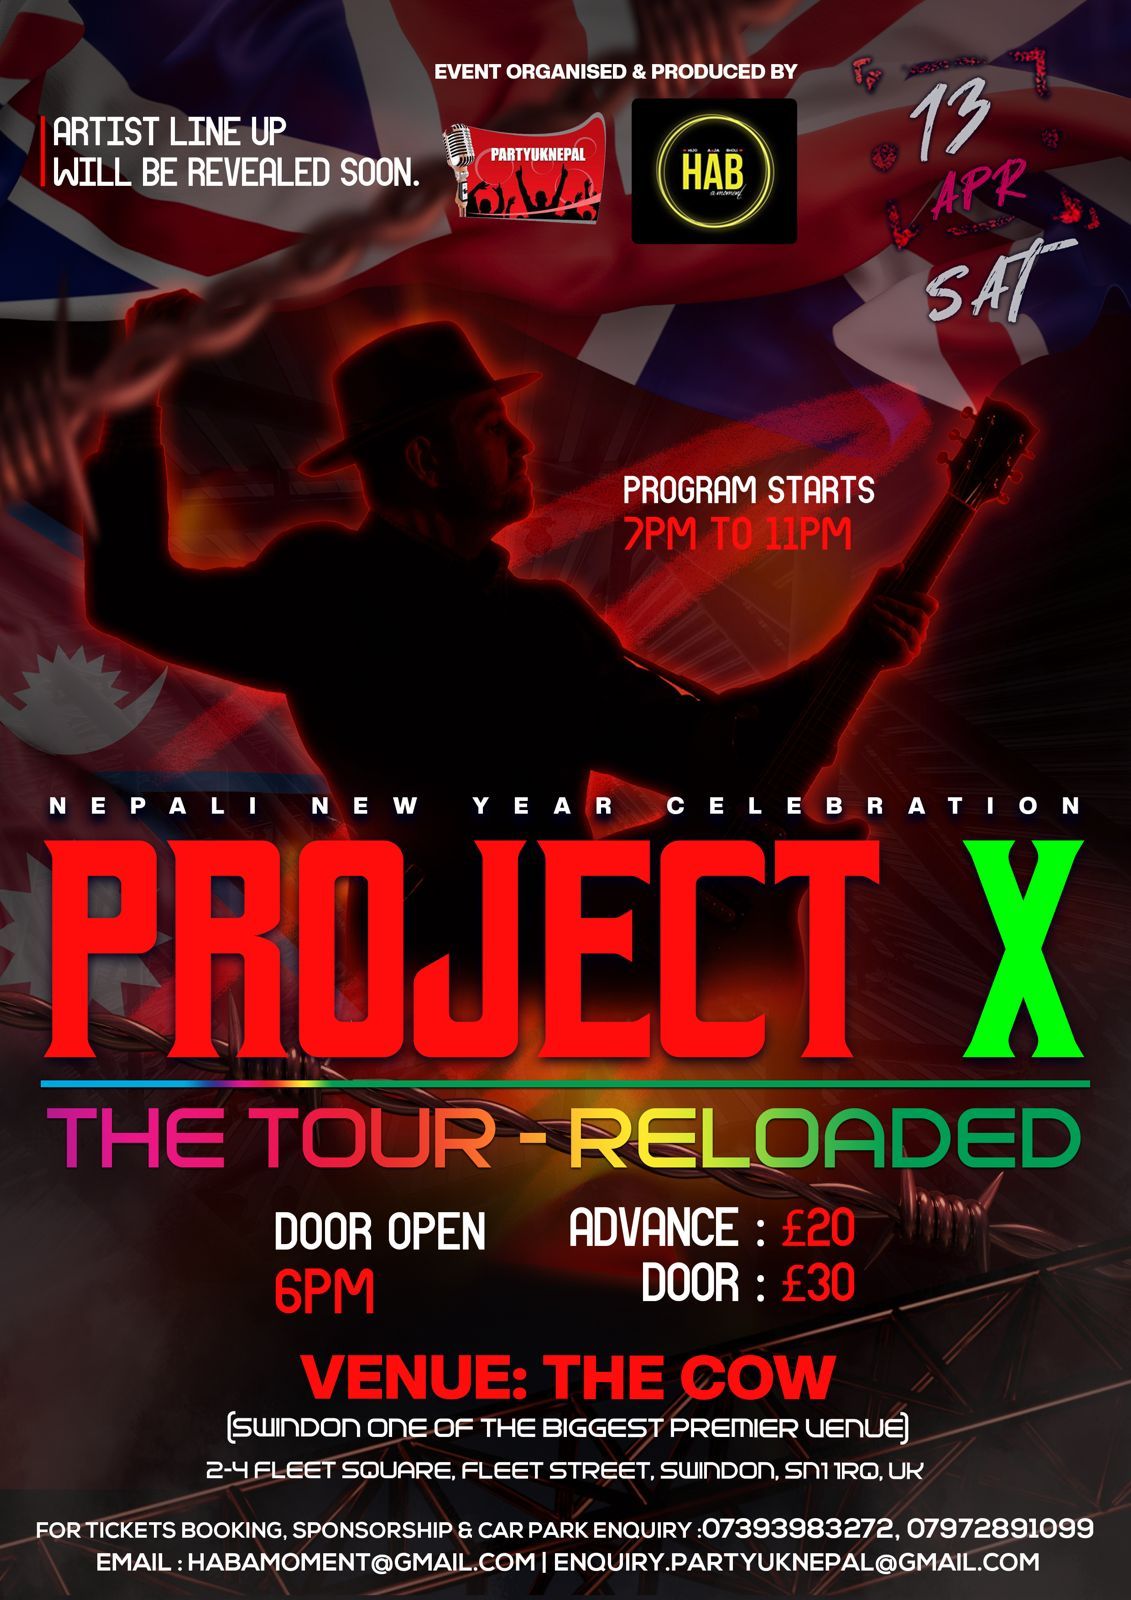 PROJECT X, THE TOUR - RELOADED